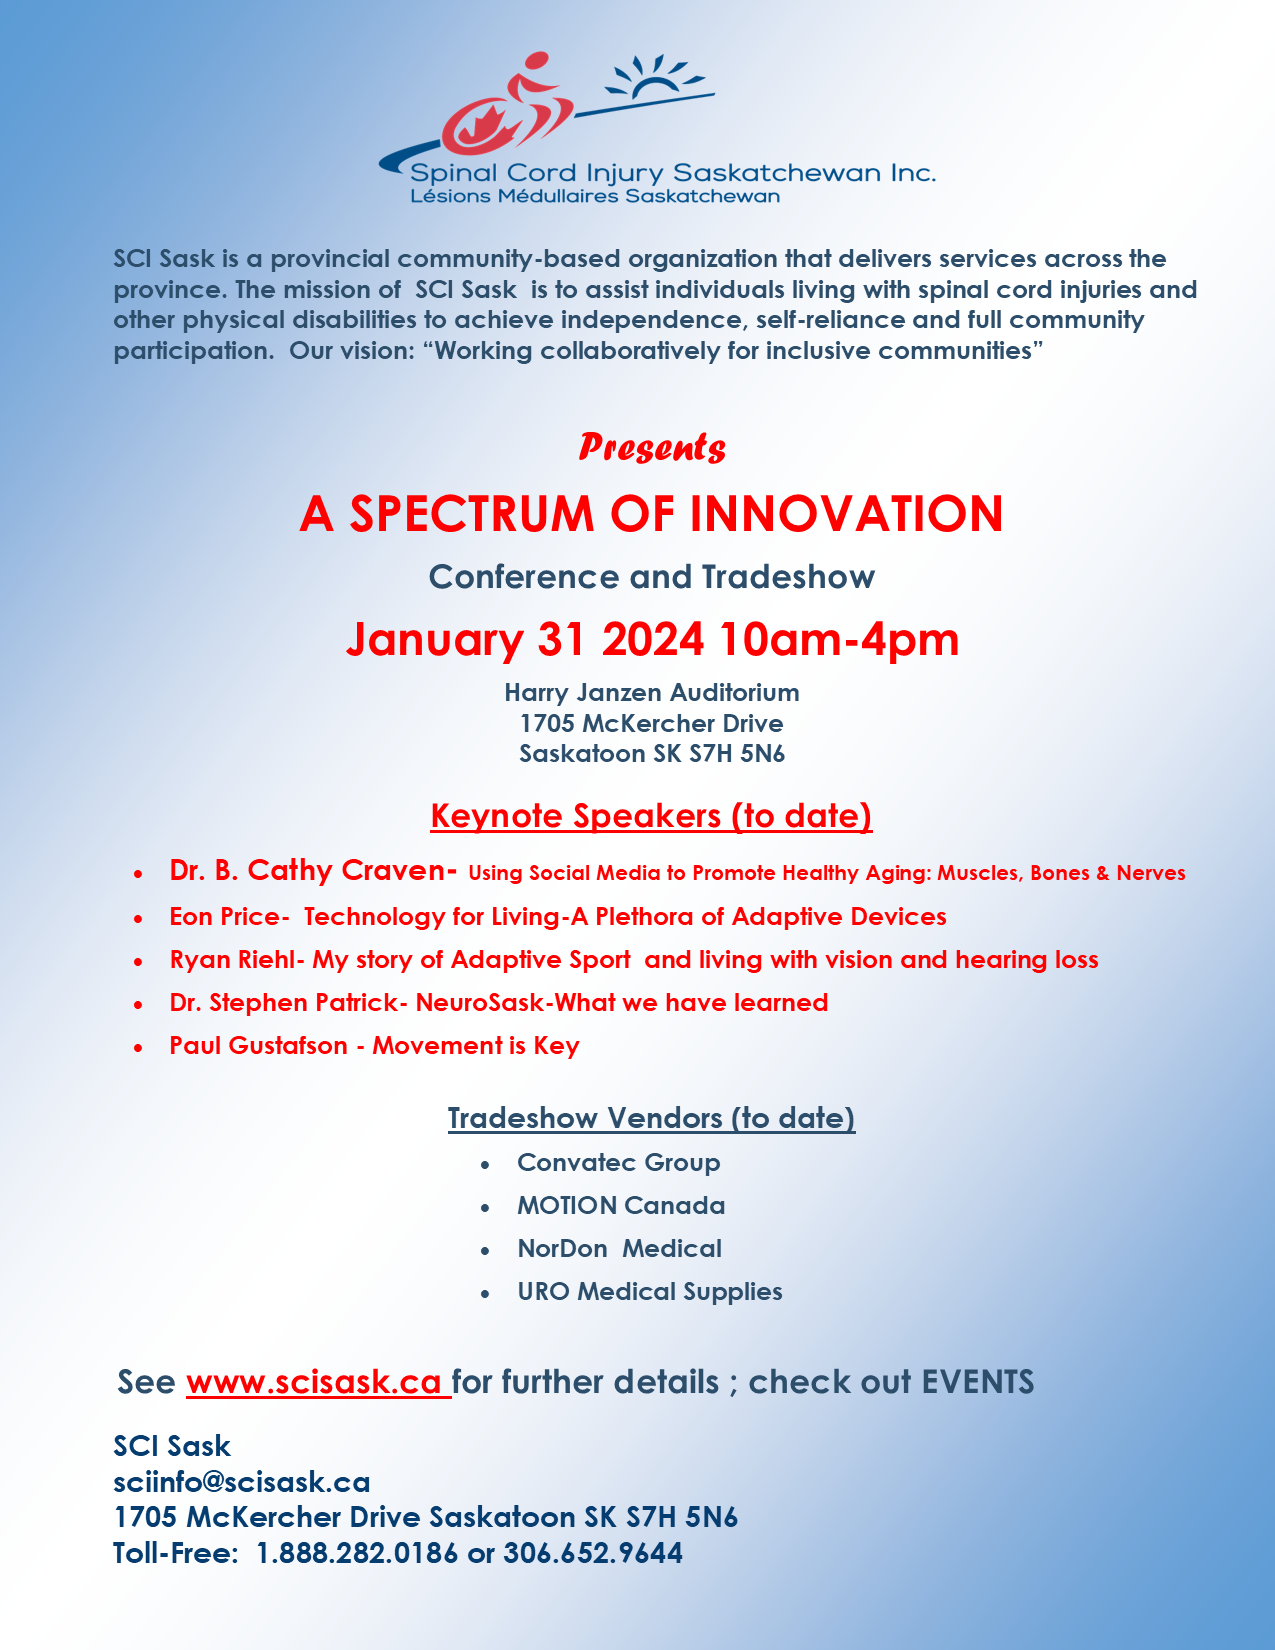 A SPECTRUM OF INNOVATION JANUARY 31 2024 Details